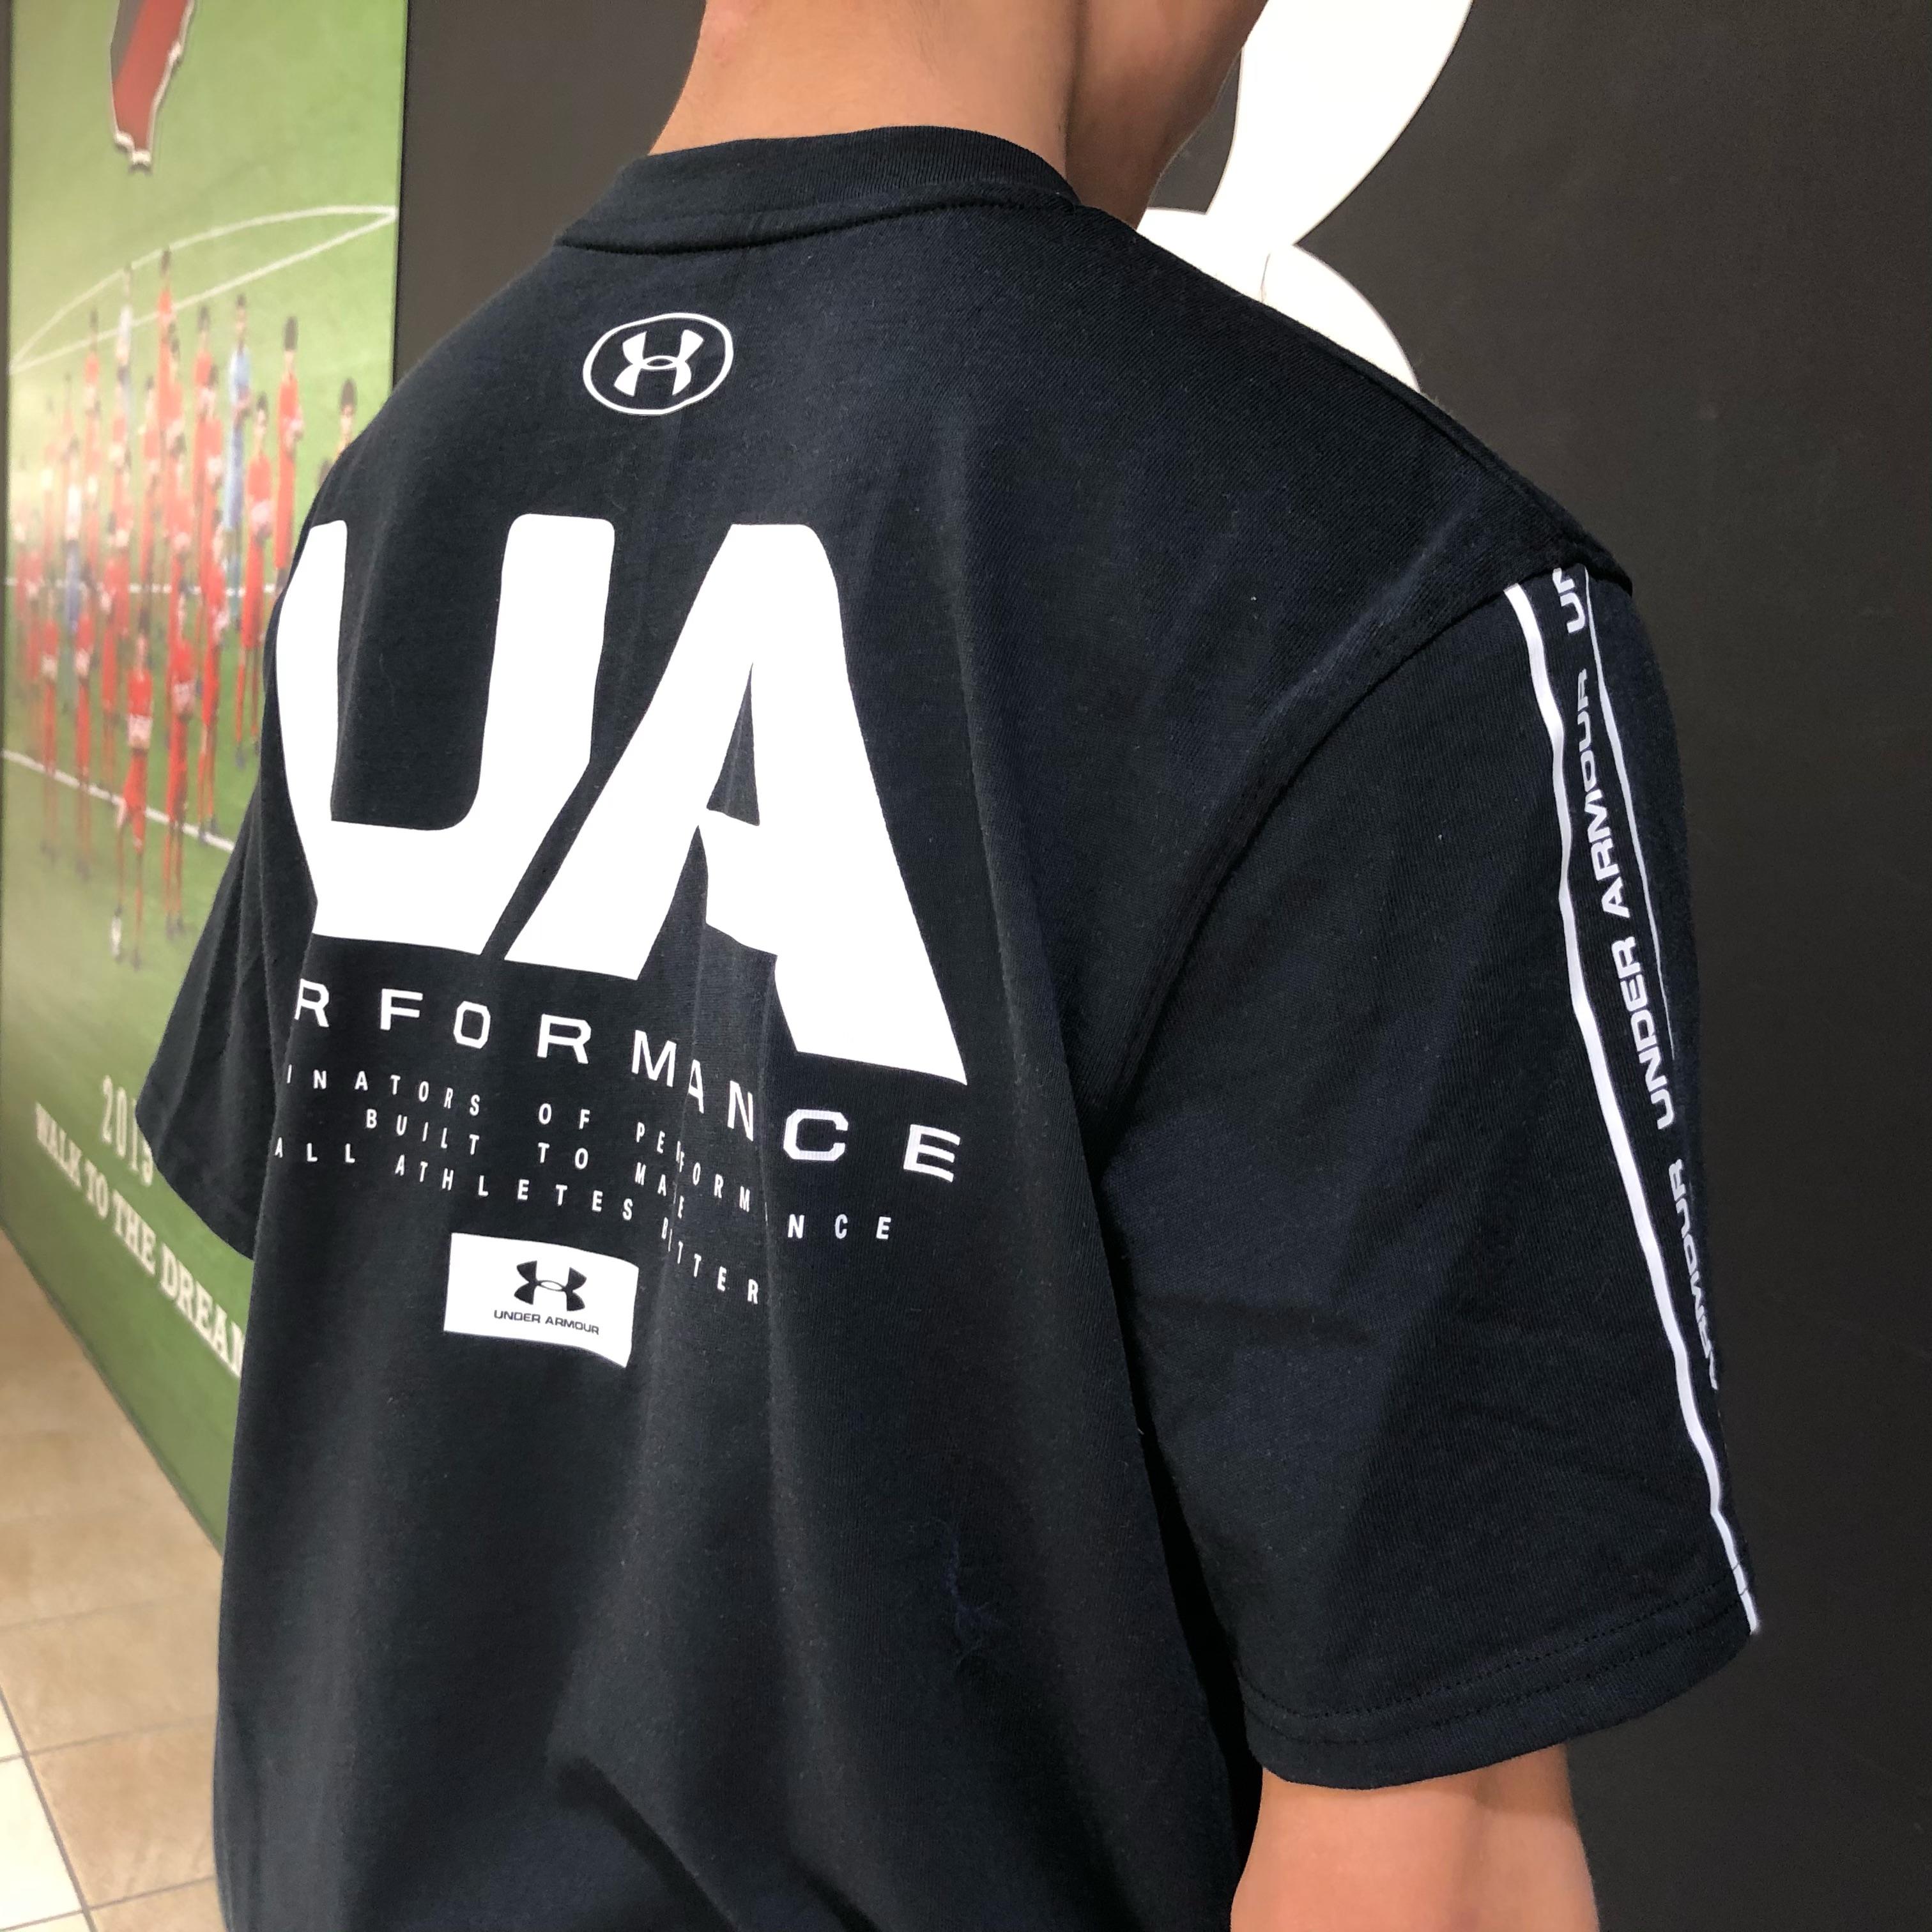 UA Tシャツ 1 | UNDER ARMOUR CLUBHOUSE いわきラトブ | SHOP BLOG 